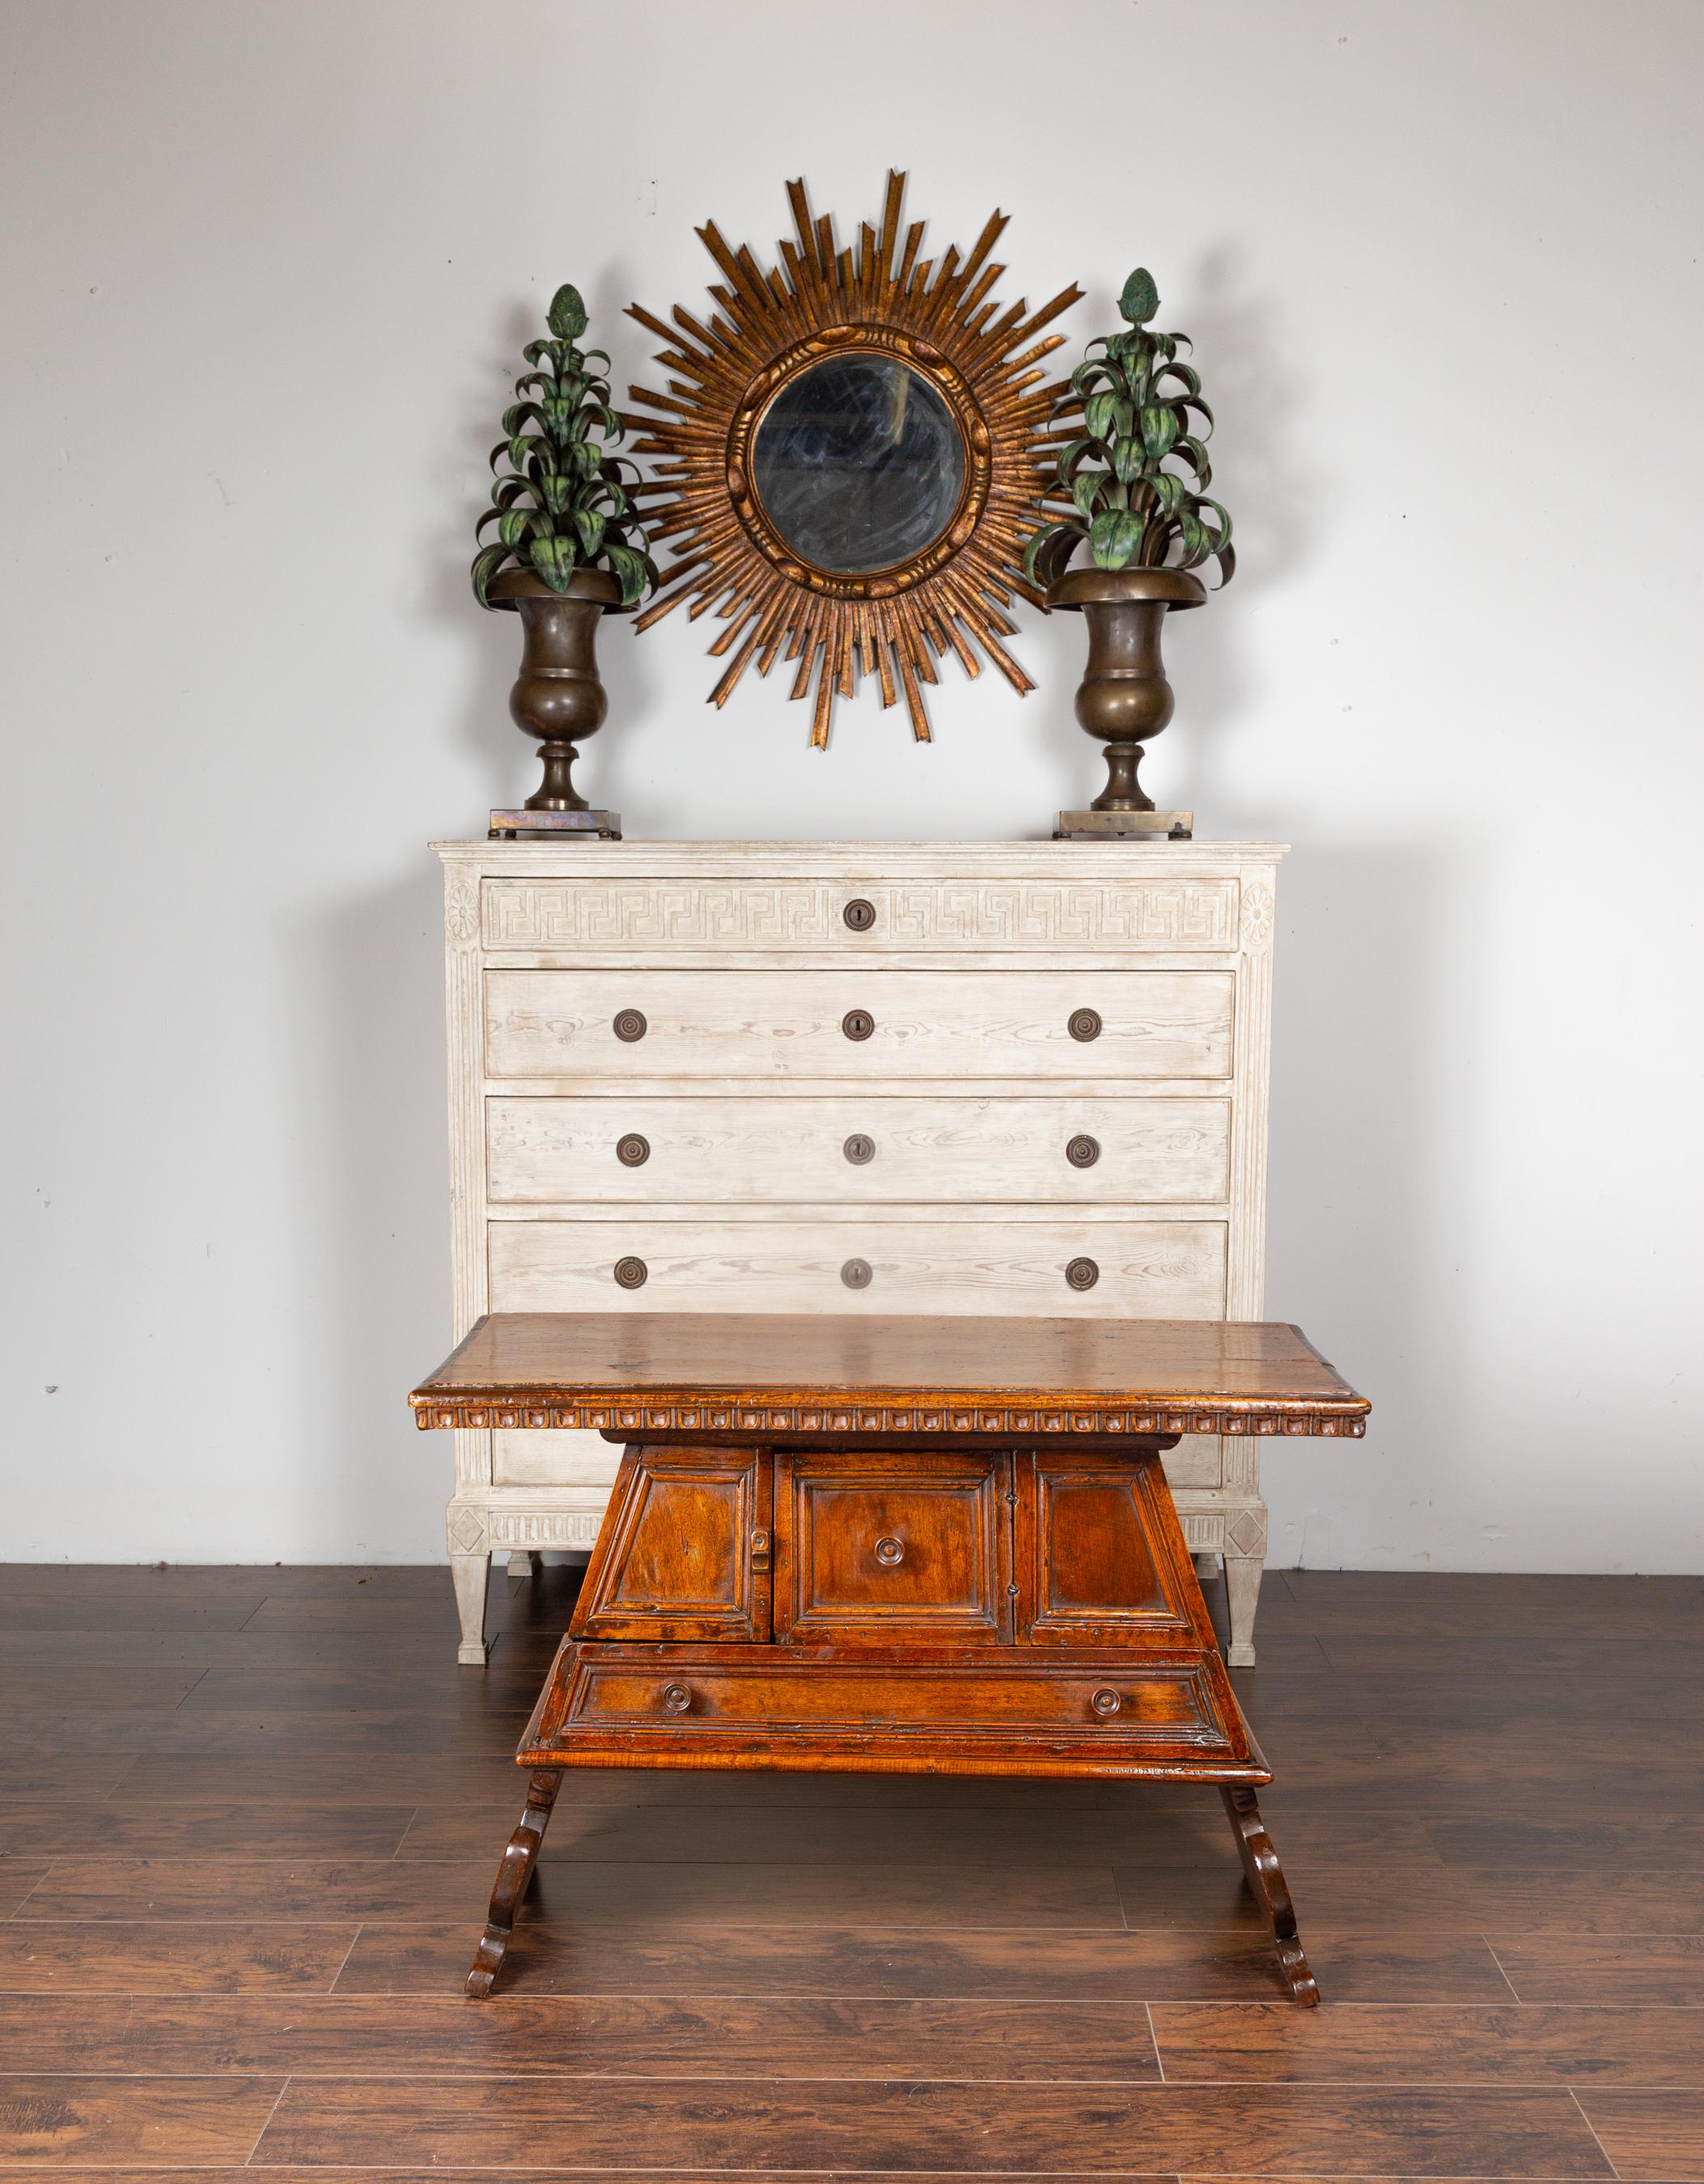 An Italian walnut console cabinet table from the early 19th century, with scoop patterns and pyramidal shape. Born in Italy during the early years of the 19th century, this exquisite walnut console features a rectangular top adorned with scoop